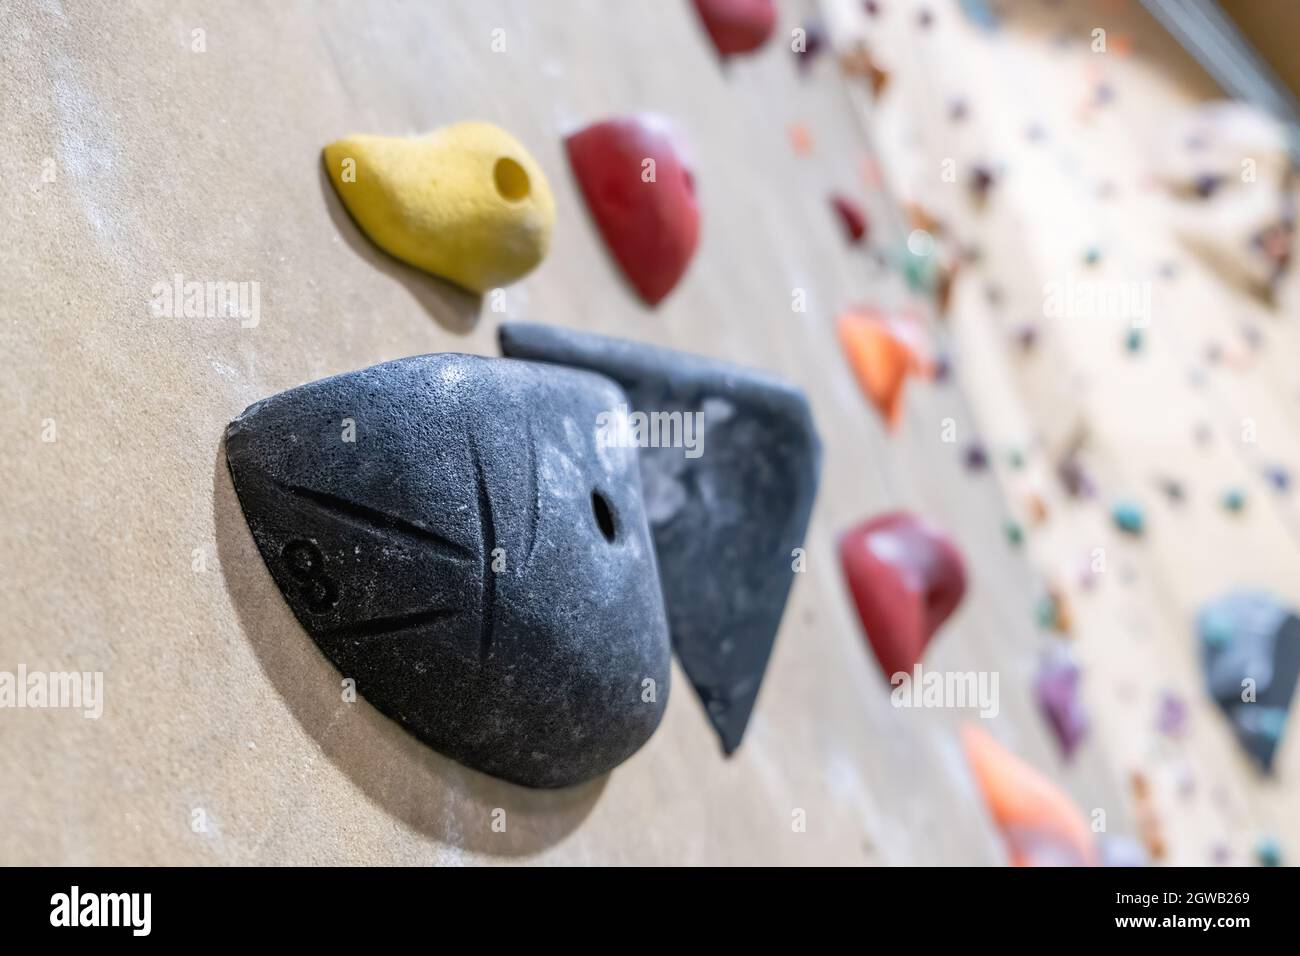 Closeup Of Black Pocket Climbing Hold On Blurred Background Stock Photo